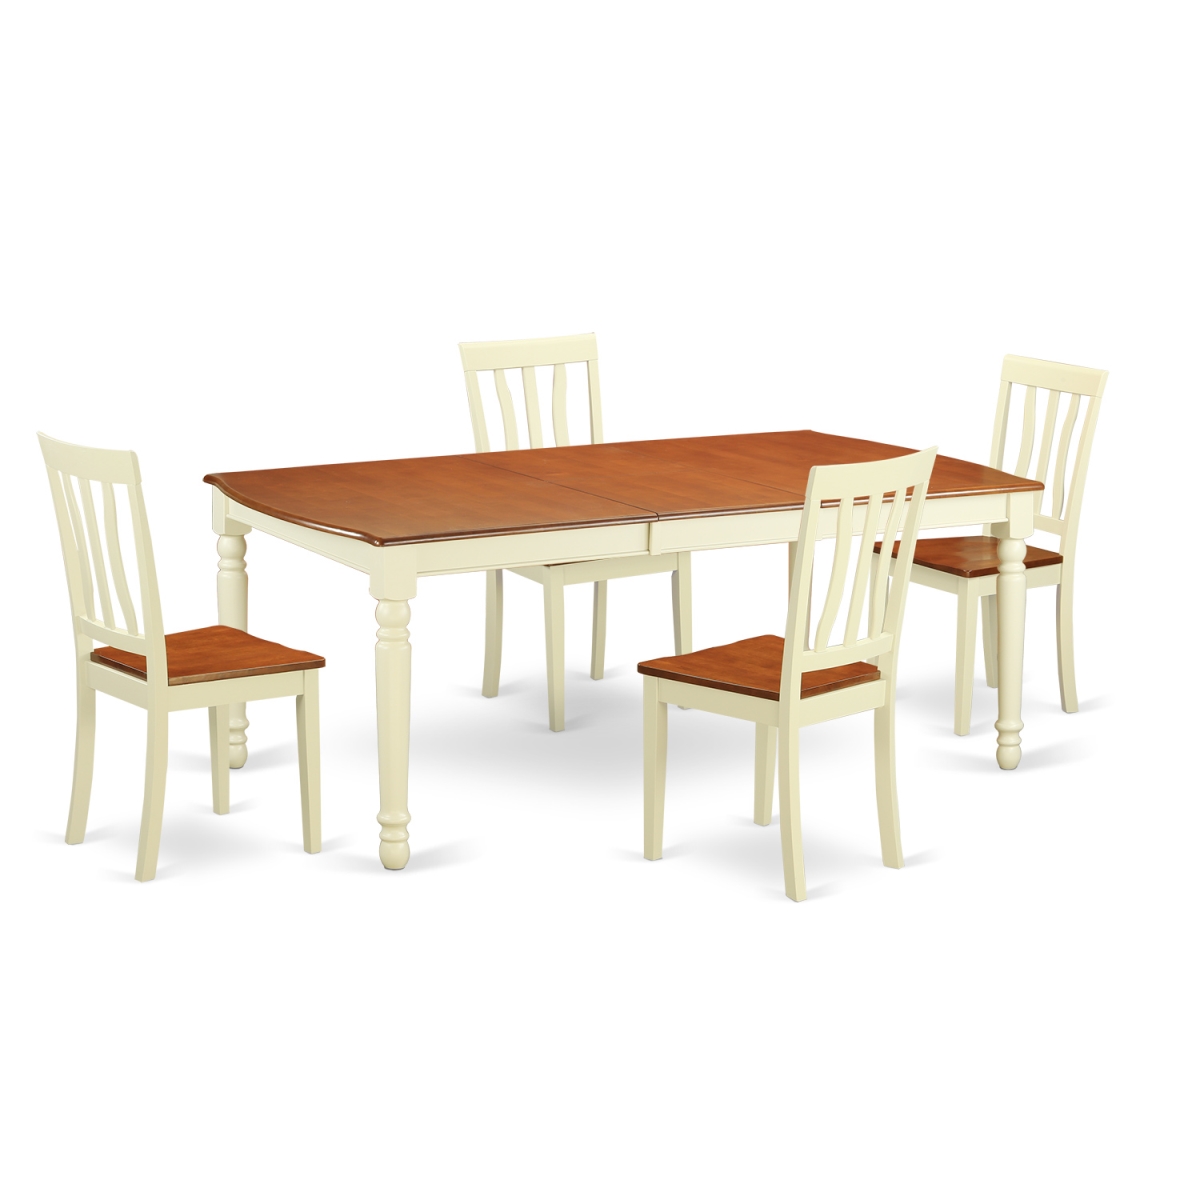 DOAN5-WHI-W Table & Chair Set - Dining Table & 4 Chairs, Buttermilk & Cherry - 5 Piece -  East West Furniture